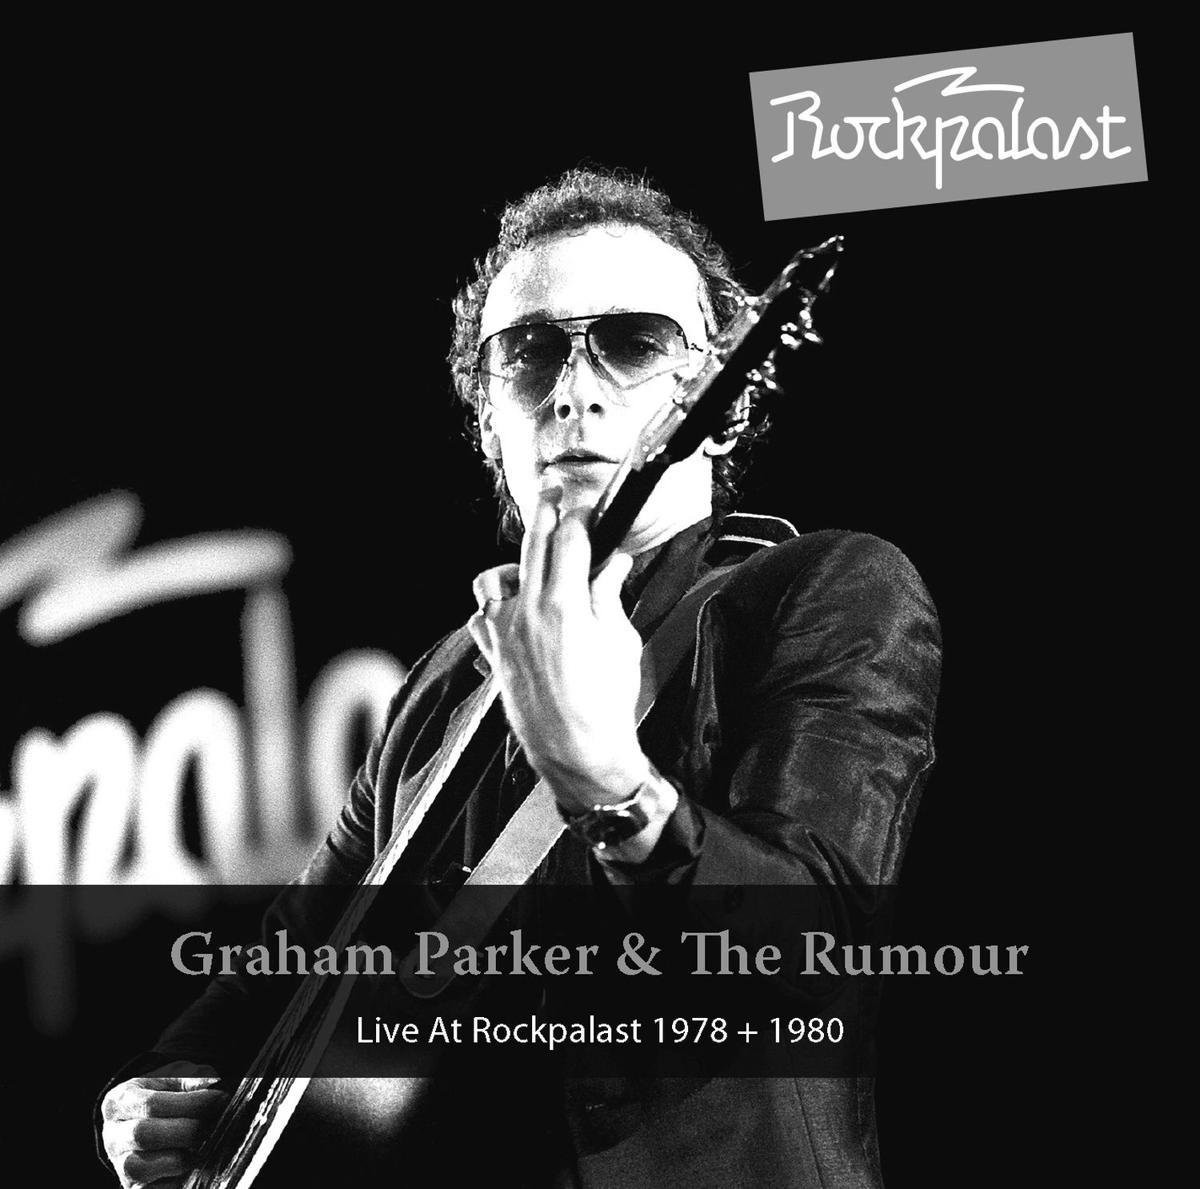 Graham Parker & The Rumour - Live At Rockpalast 1978 + 1980